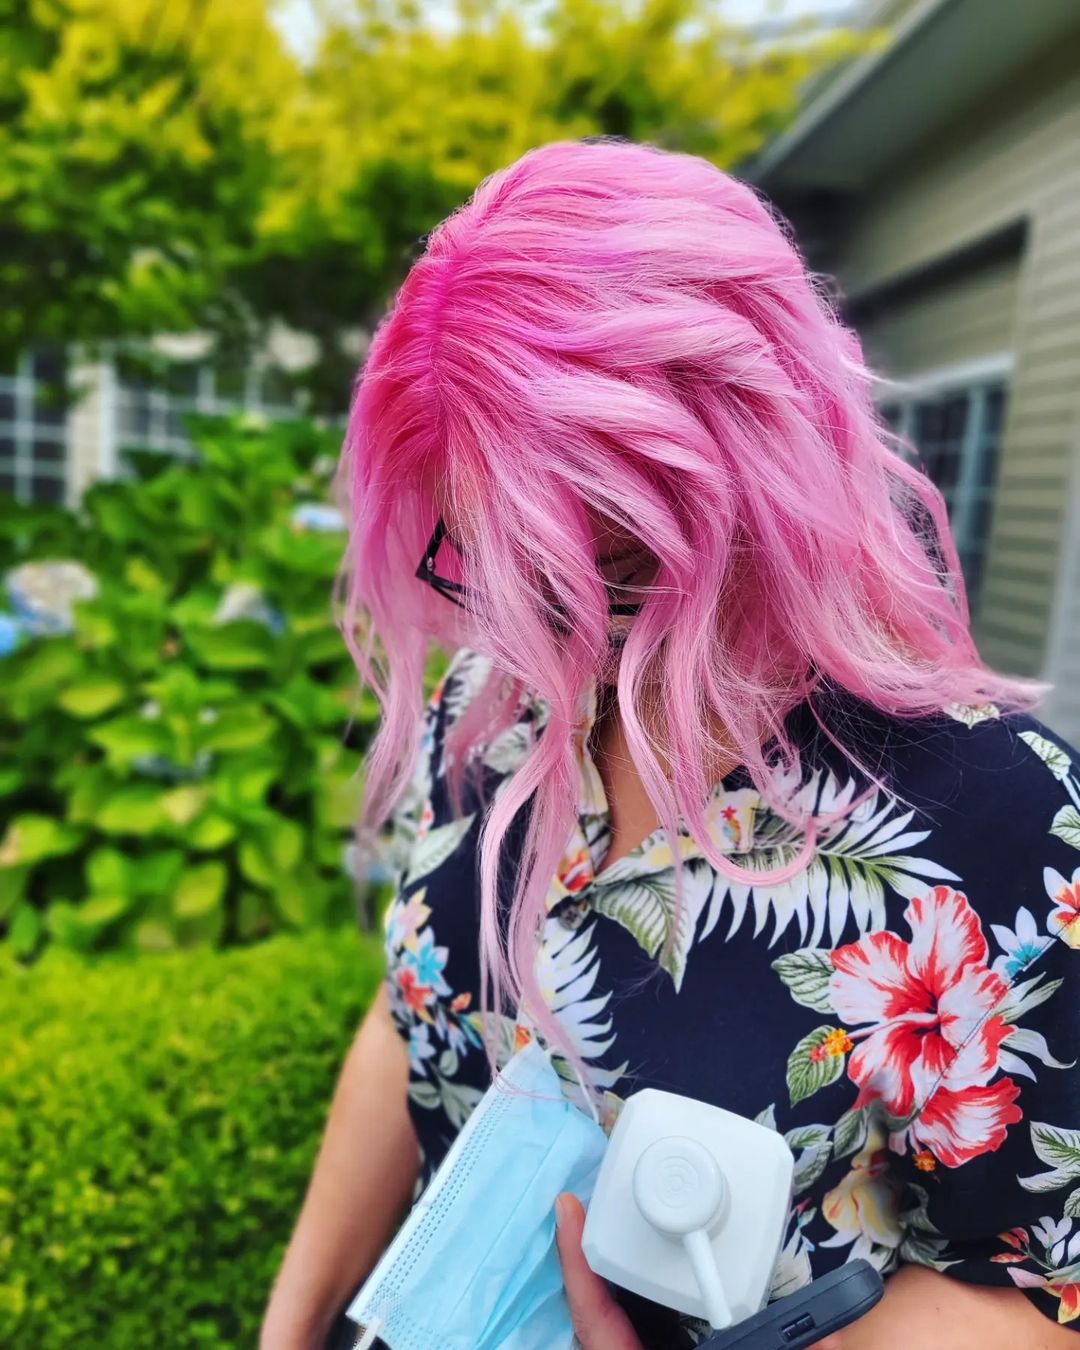 pink ombre hair color 123 Ombre pink hair blonde | Pastel pink ombre hair | Pink balayage Hair Pink Ombre Hair Color for Women